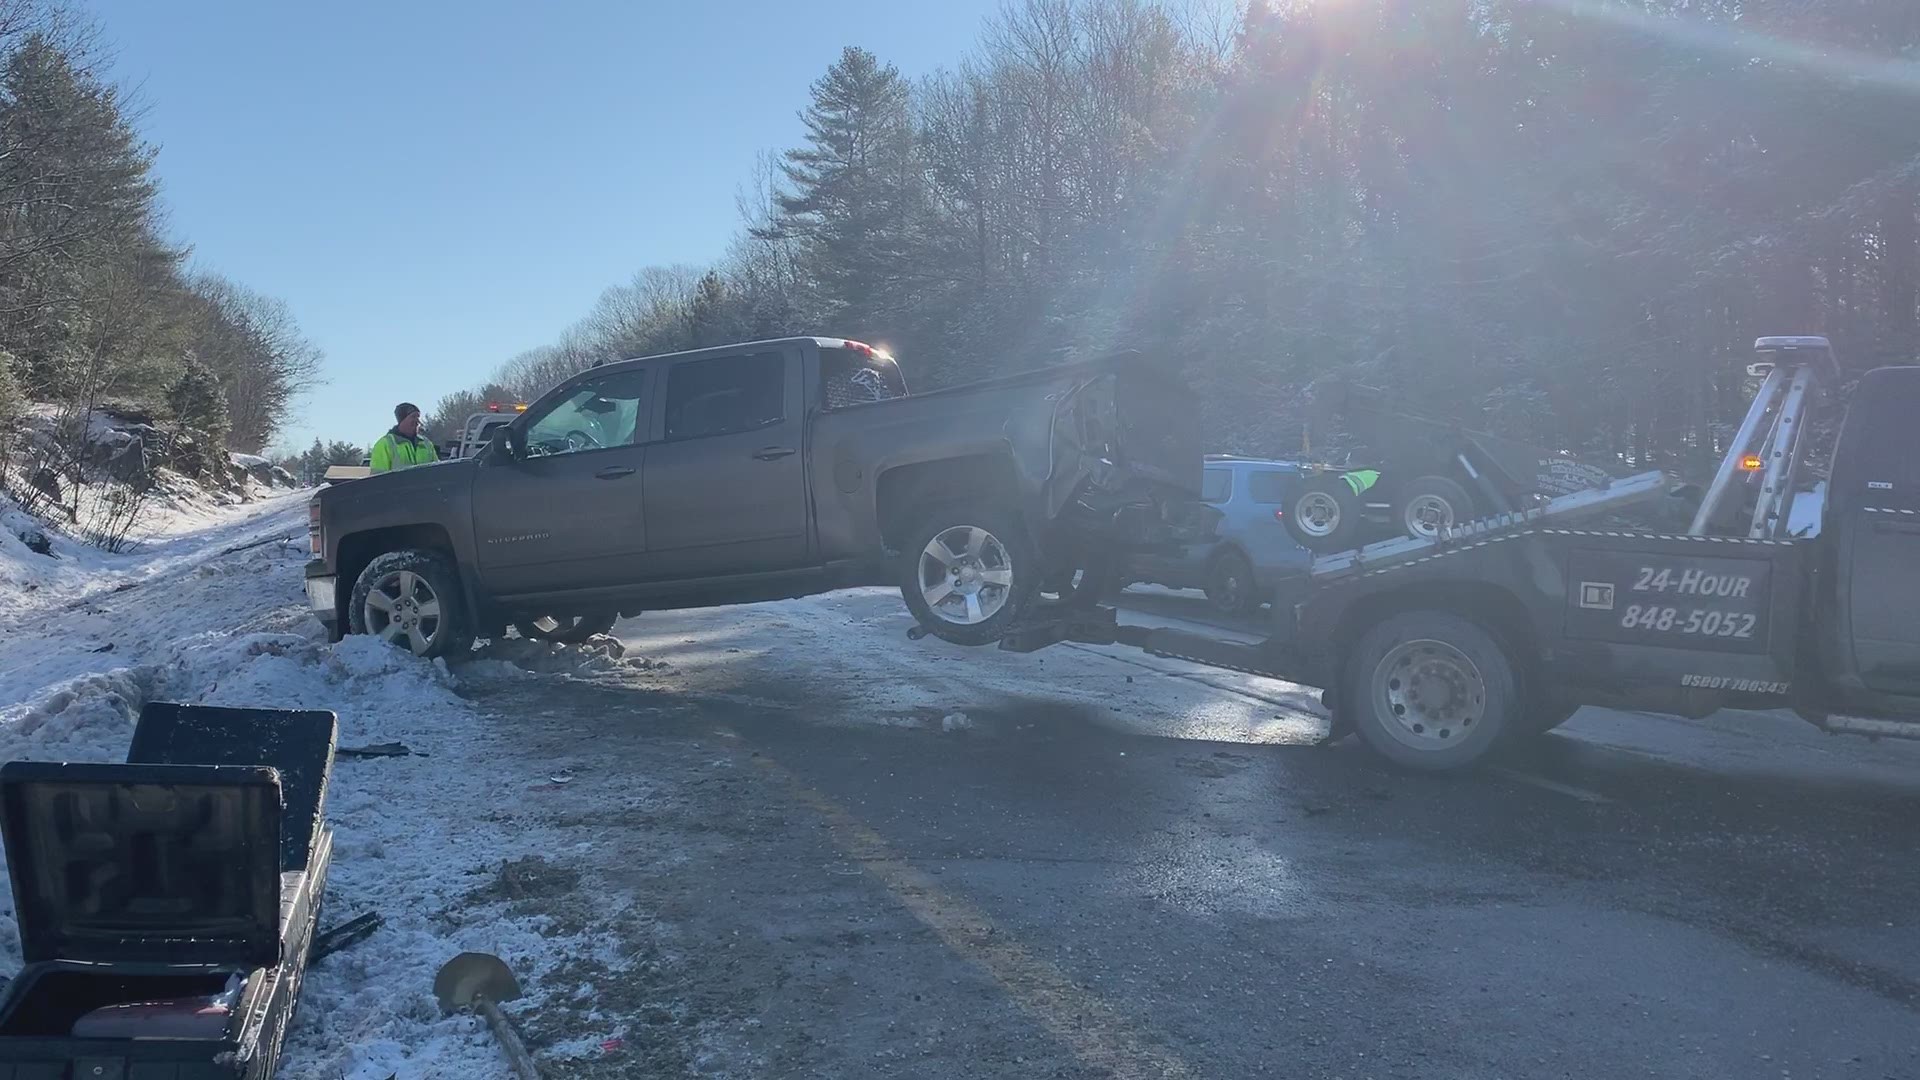 A car crash pileup involving about 30 cars, left many injured, according to Maine State Police.